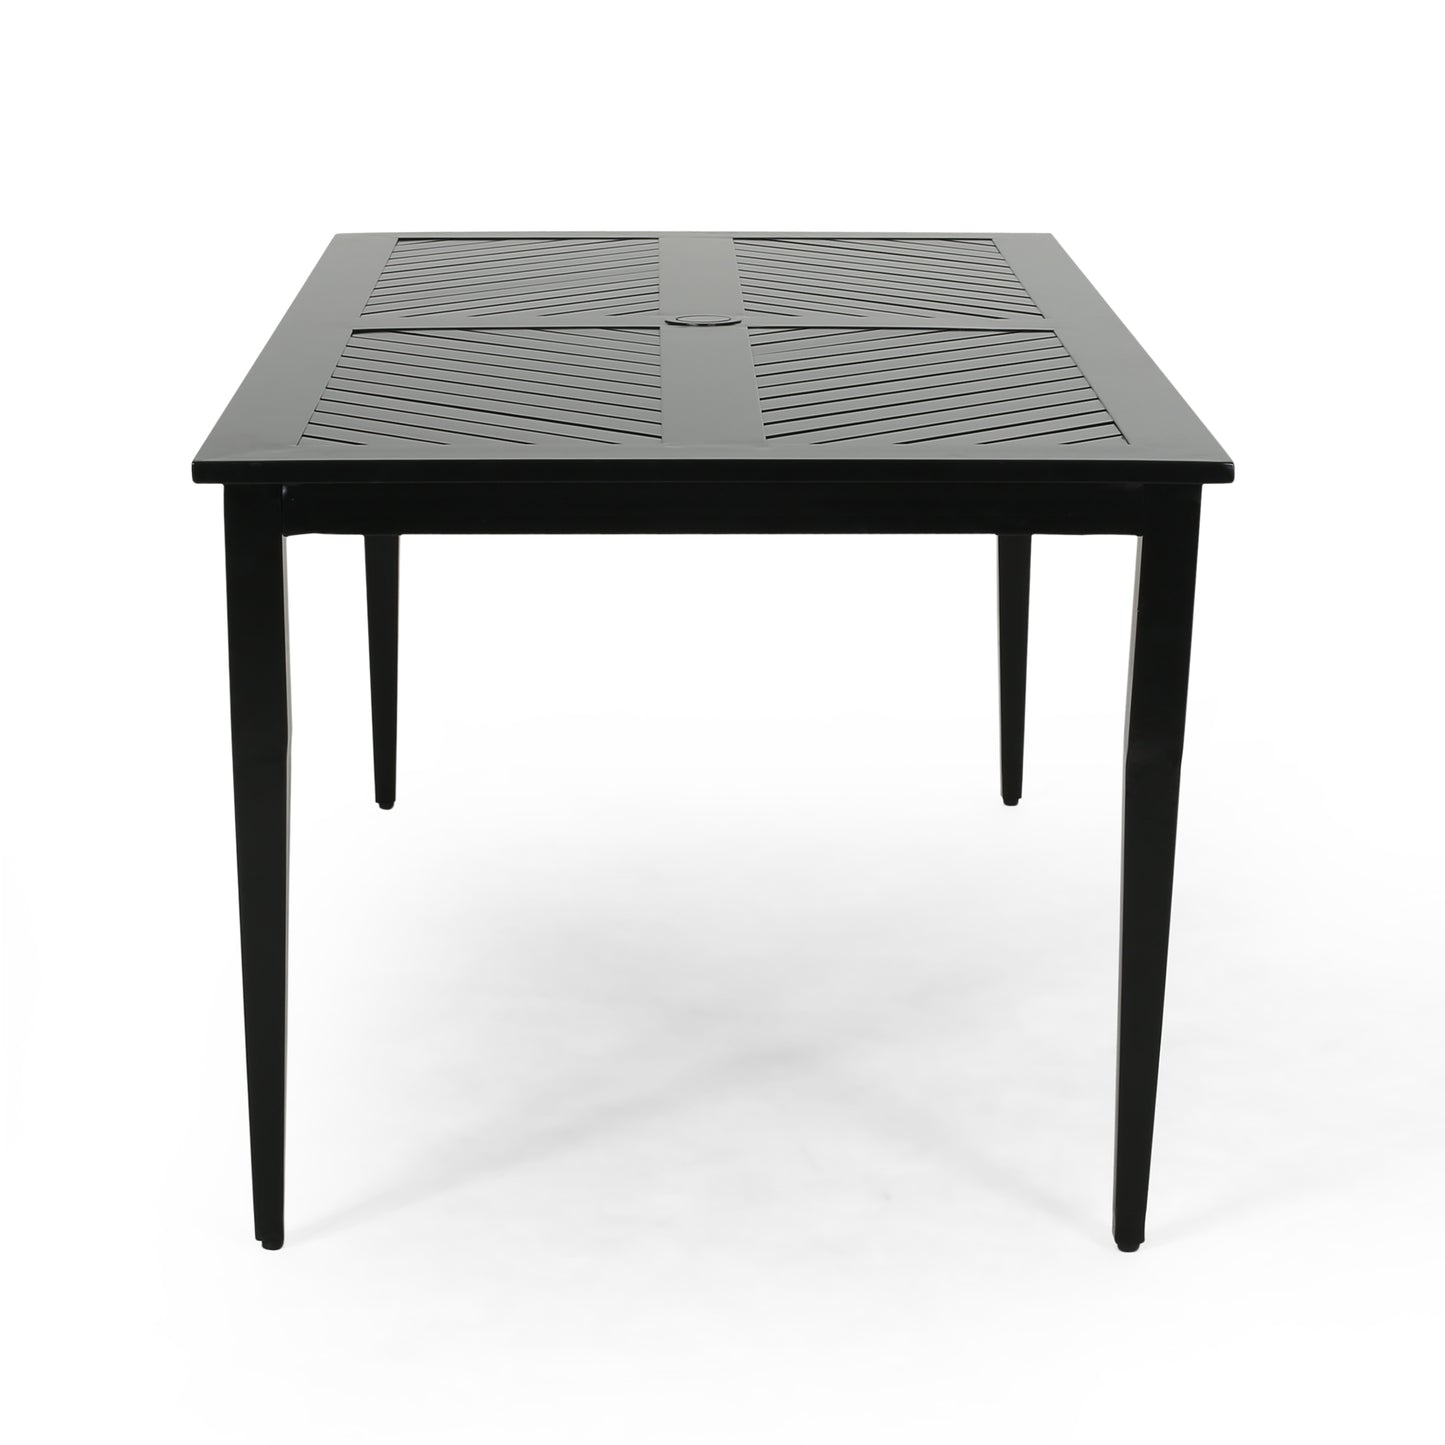 Carlson Diego Outdoor 71 Inch Aluminum Rectangular Dining Table, Matte Black